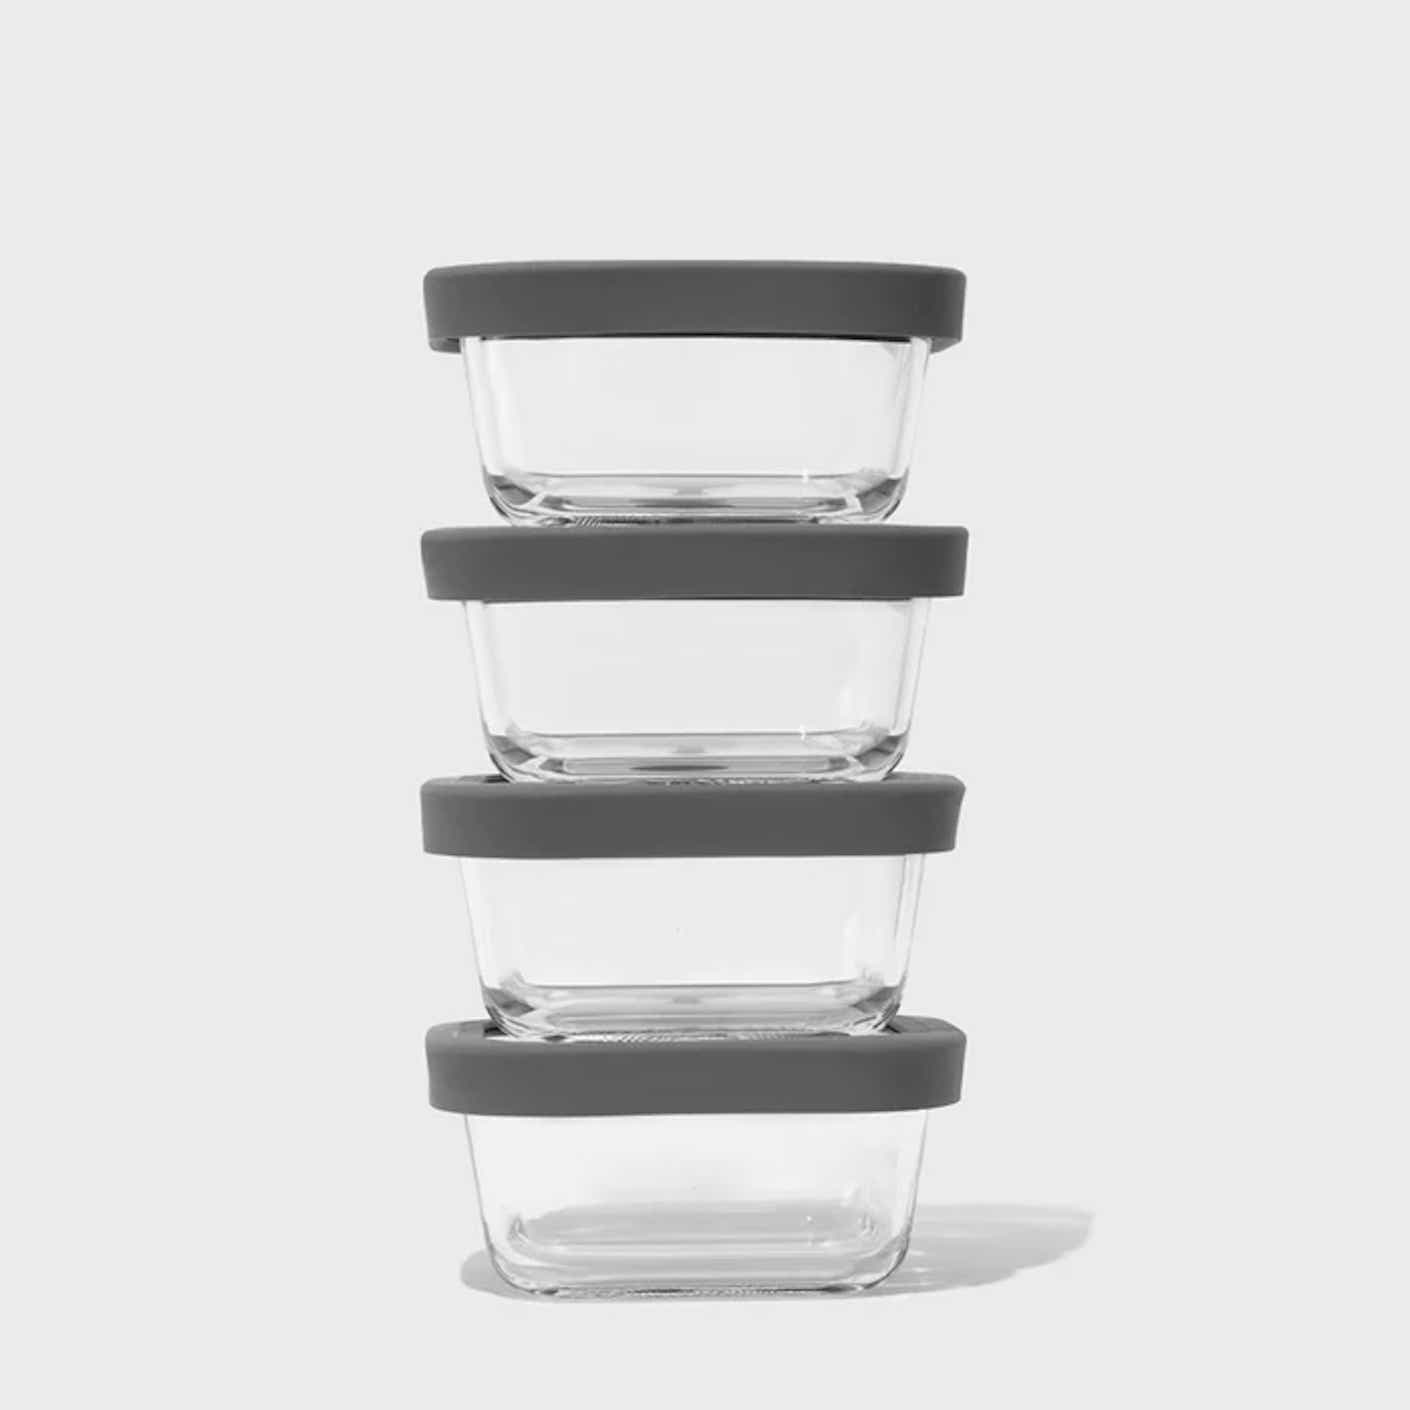 Four transparent containers for food storage are stacked on top of each other.